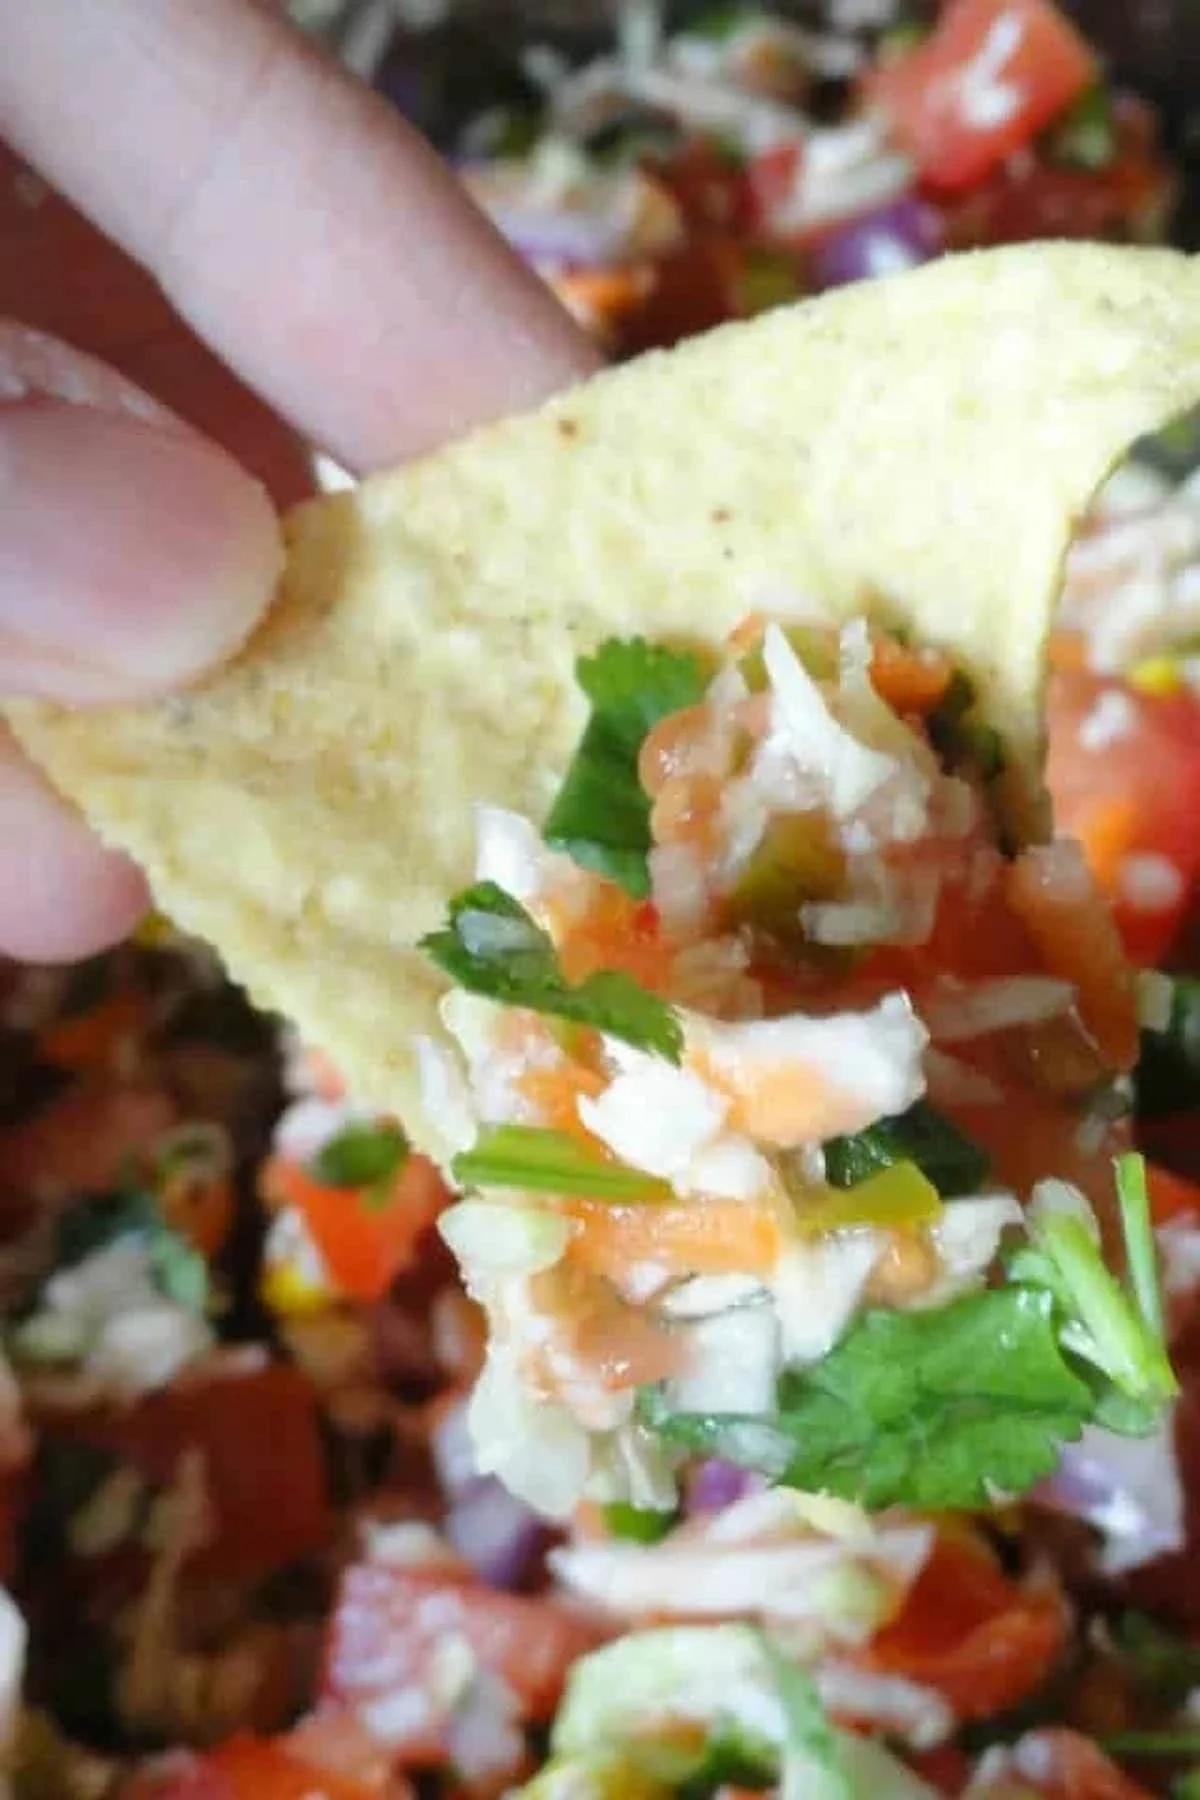 Pico De Gallo being scooped with a chip.